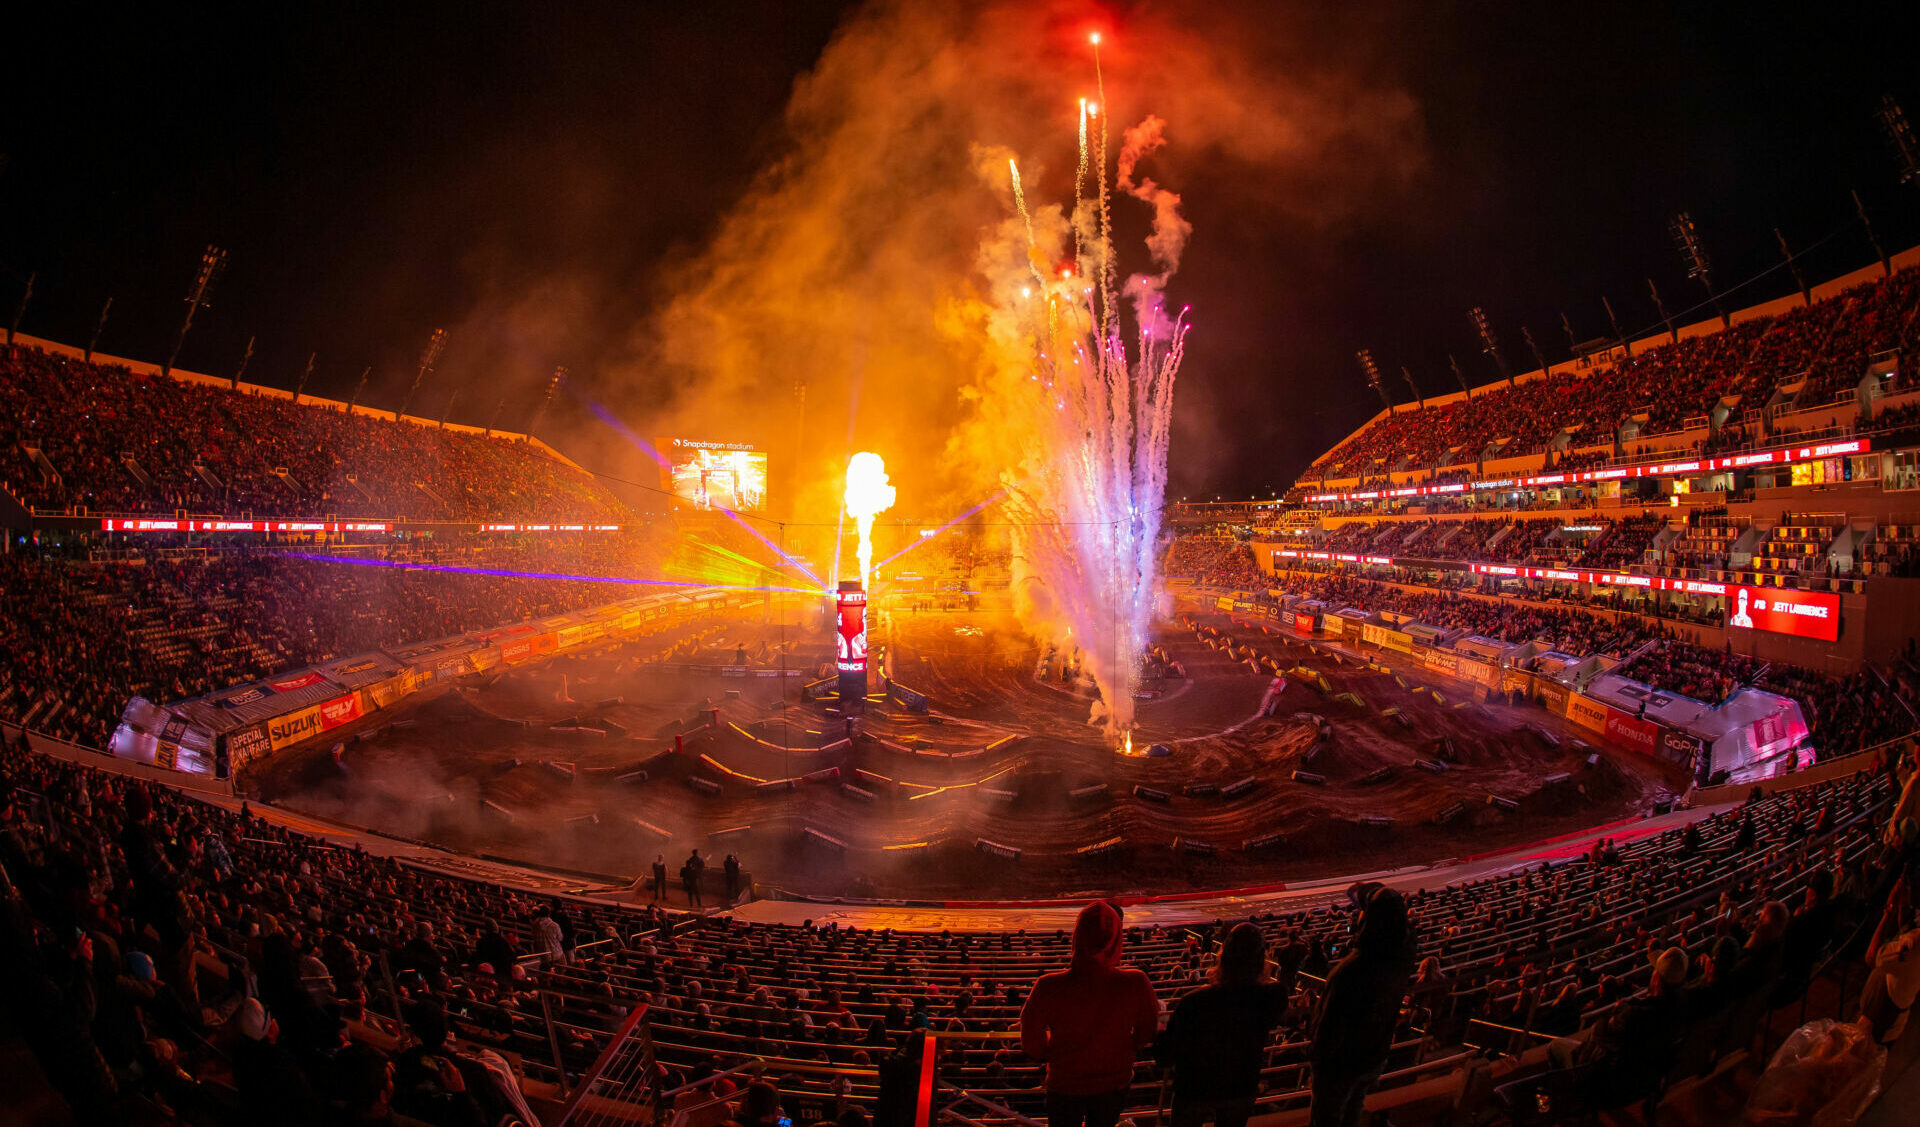 Opening Ceremonies for the Inaugural Supercross at Snapdragon Stadium, Marking 40 Years of Racing in San Diego After Visiting Jack Murphy Stadium/Qualcomm Stadium and Petco Park. Photo courtesy Feld Motor Sports, Inc.